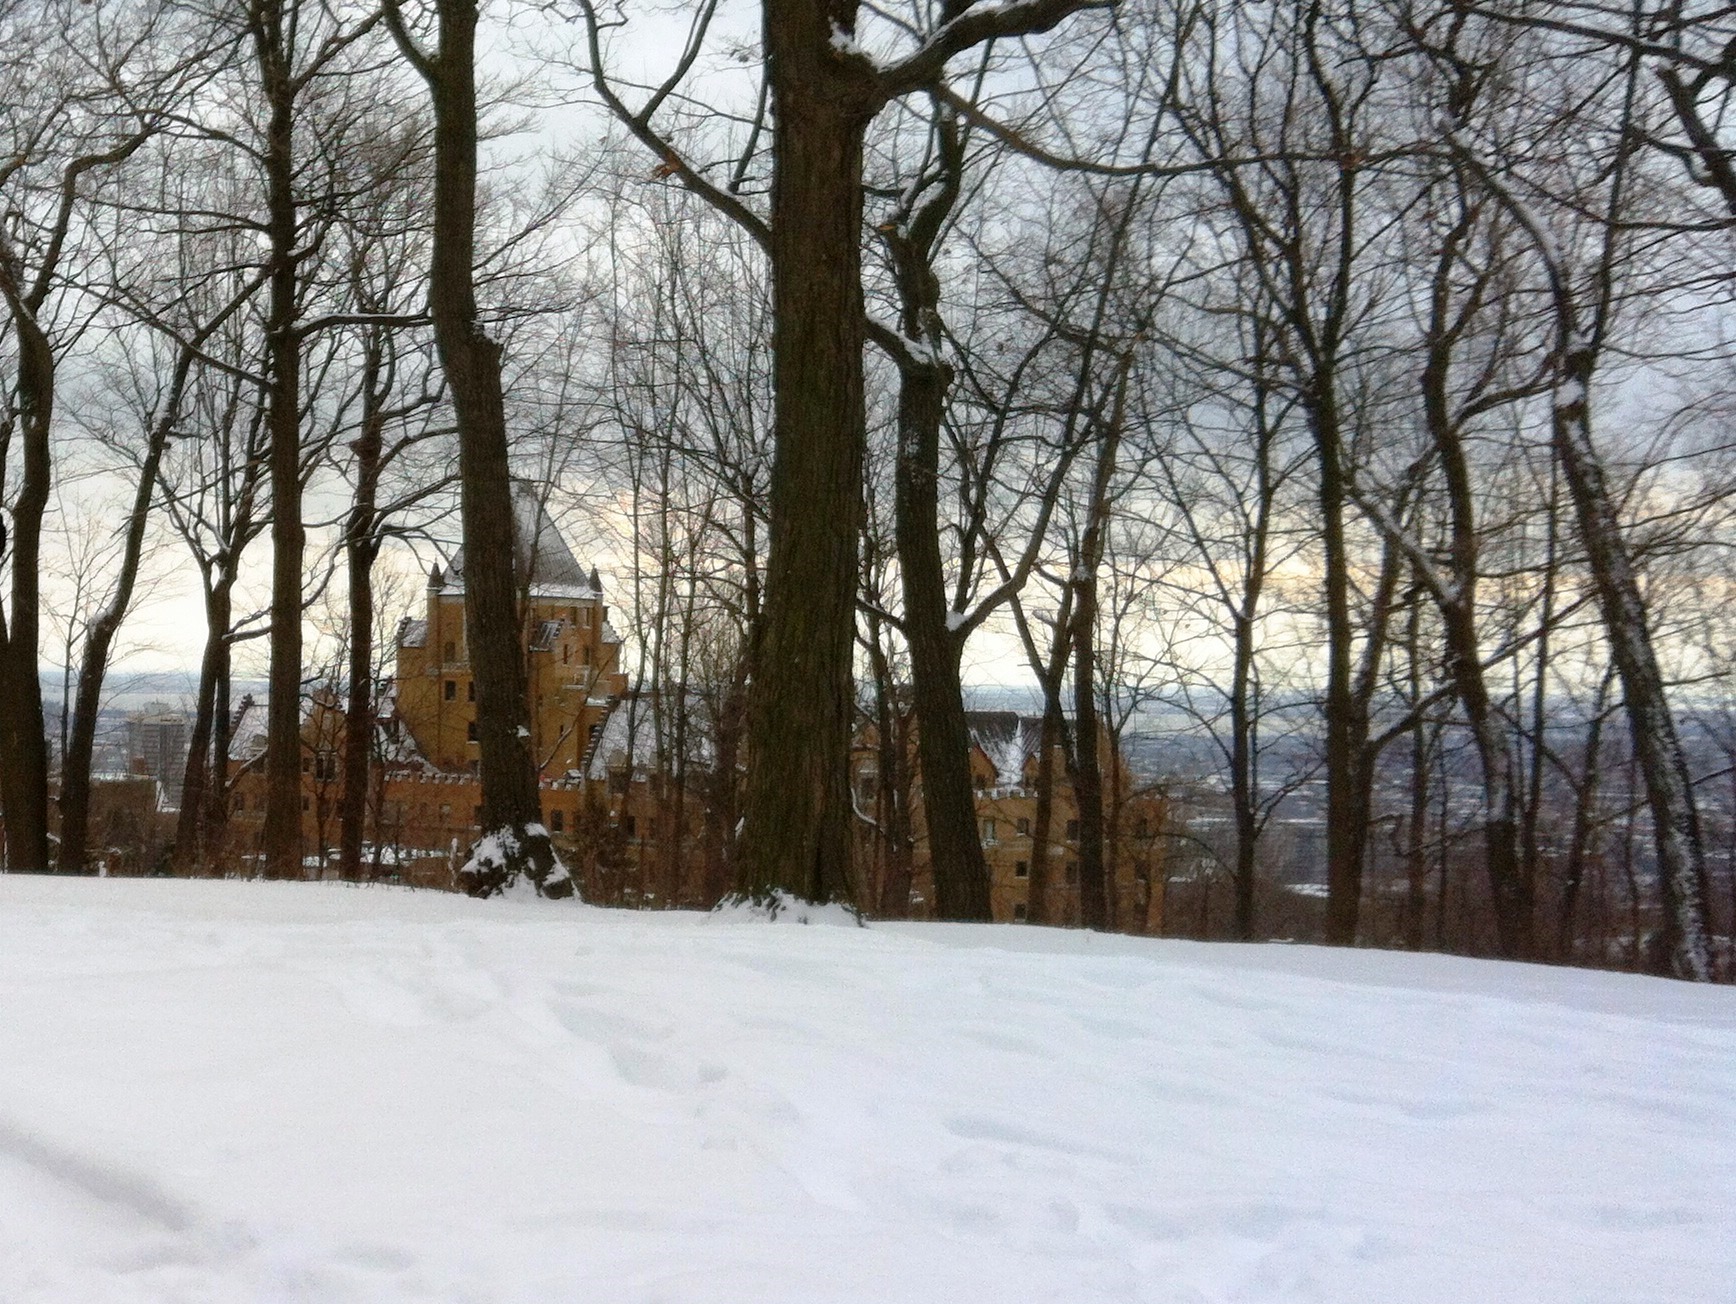 Snowshoeing in Montreal City